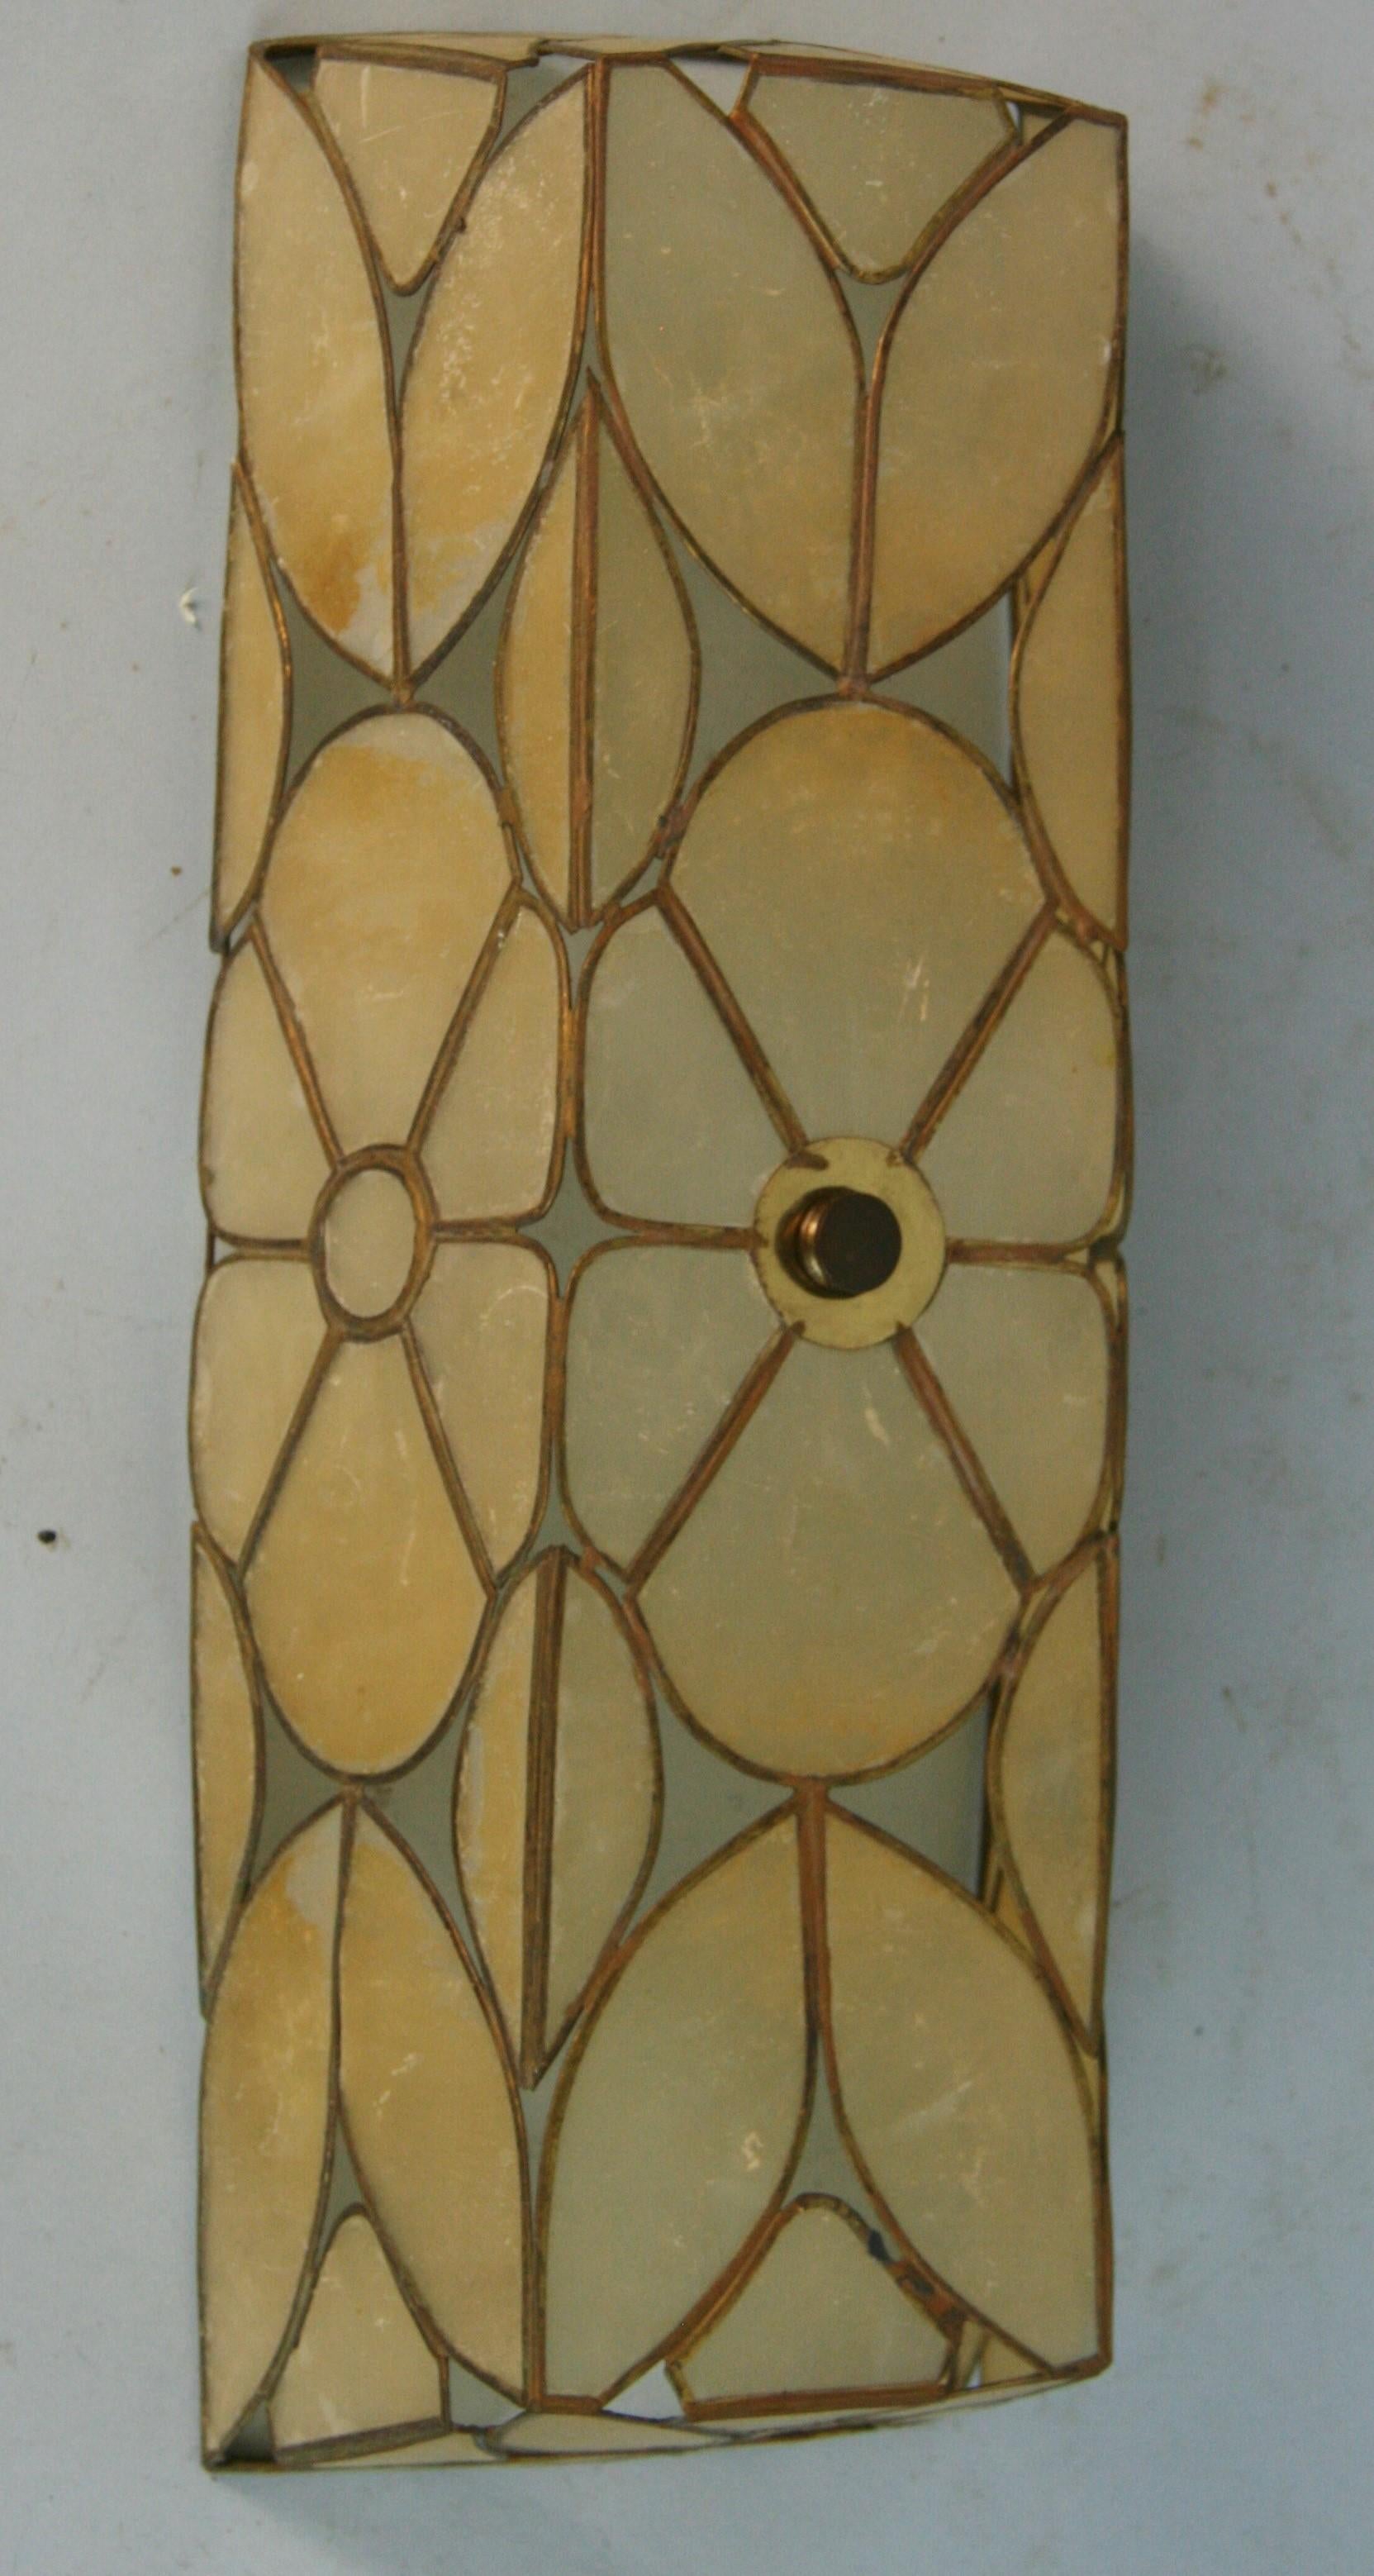 1374 Hand made capiz shell floral flush mount that can be used as a wall sconce
Takes 2 bulbs
Rewired.